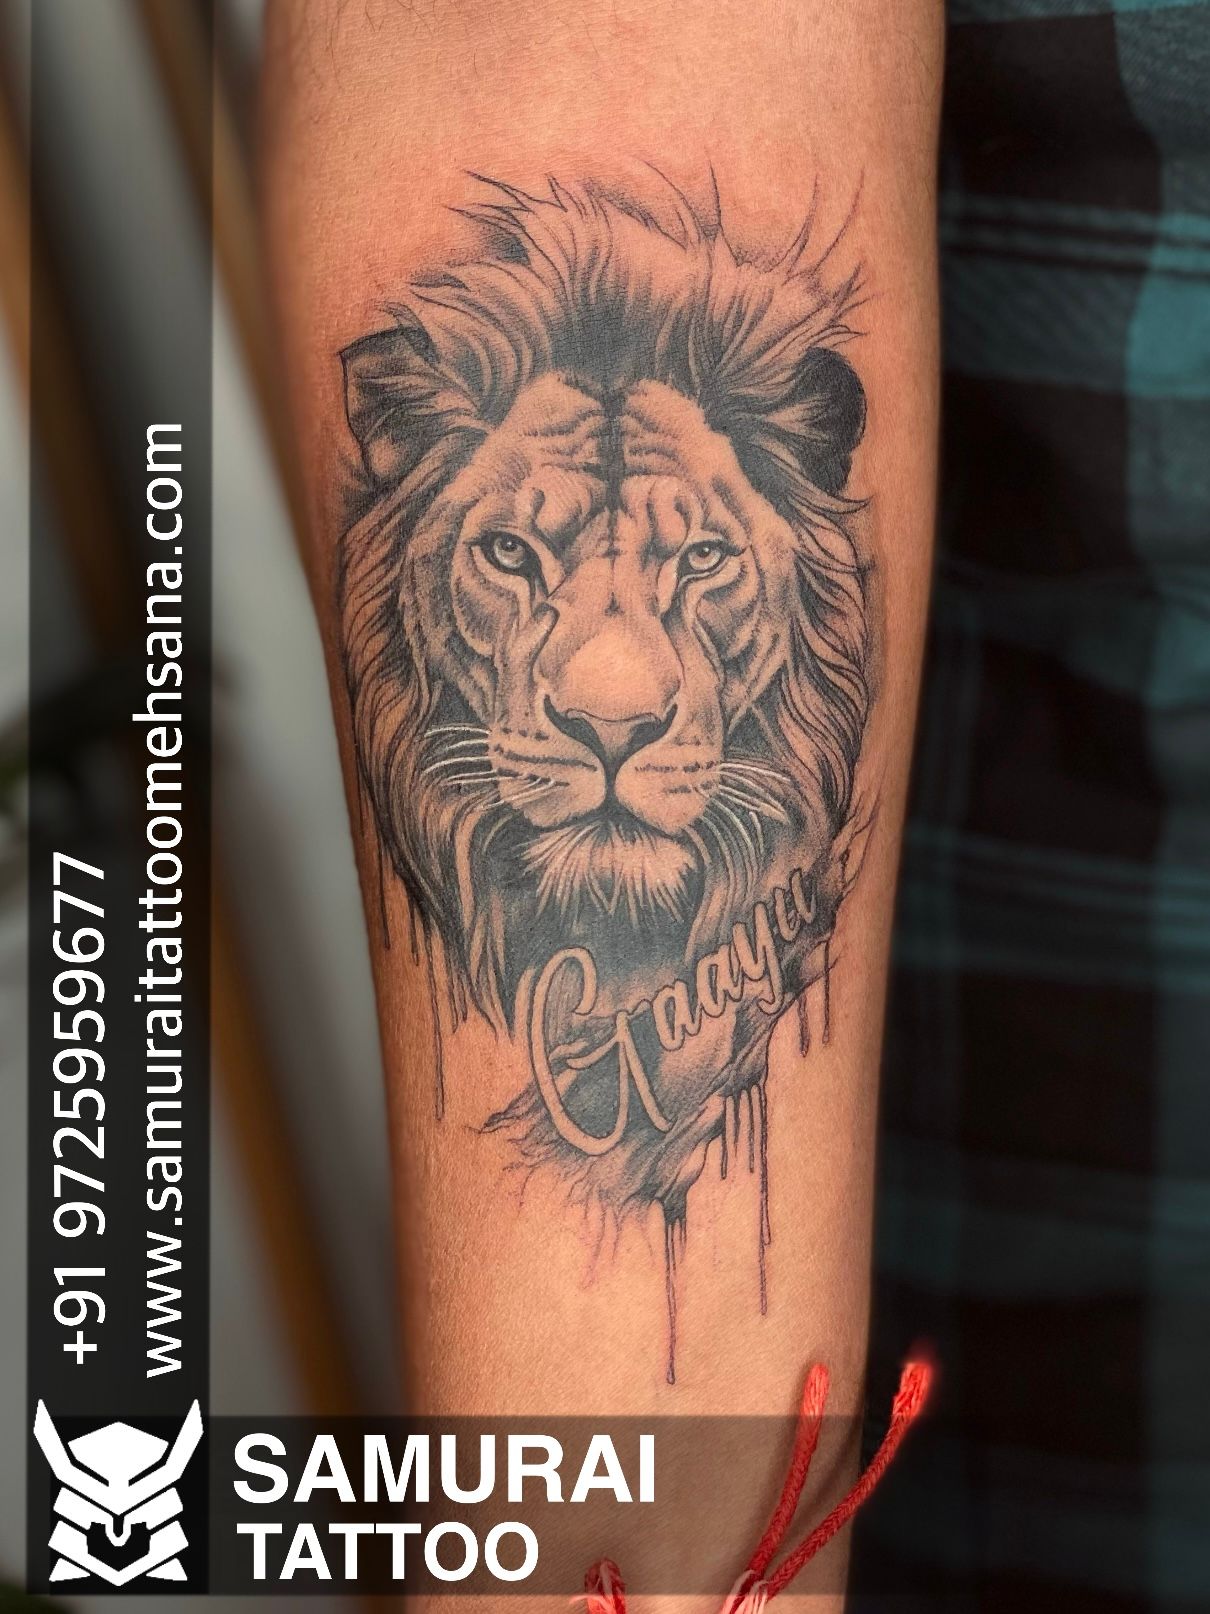 A design for his lower arm, He want a detailed lion and a rose design | Lion  head tattoos, Lion forearm tattoos, Lion shoulder tattoo